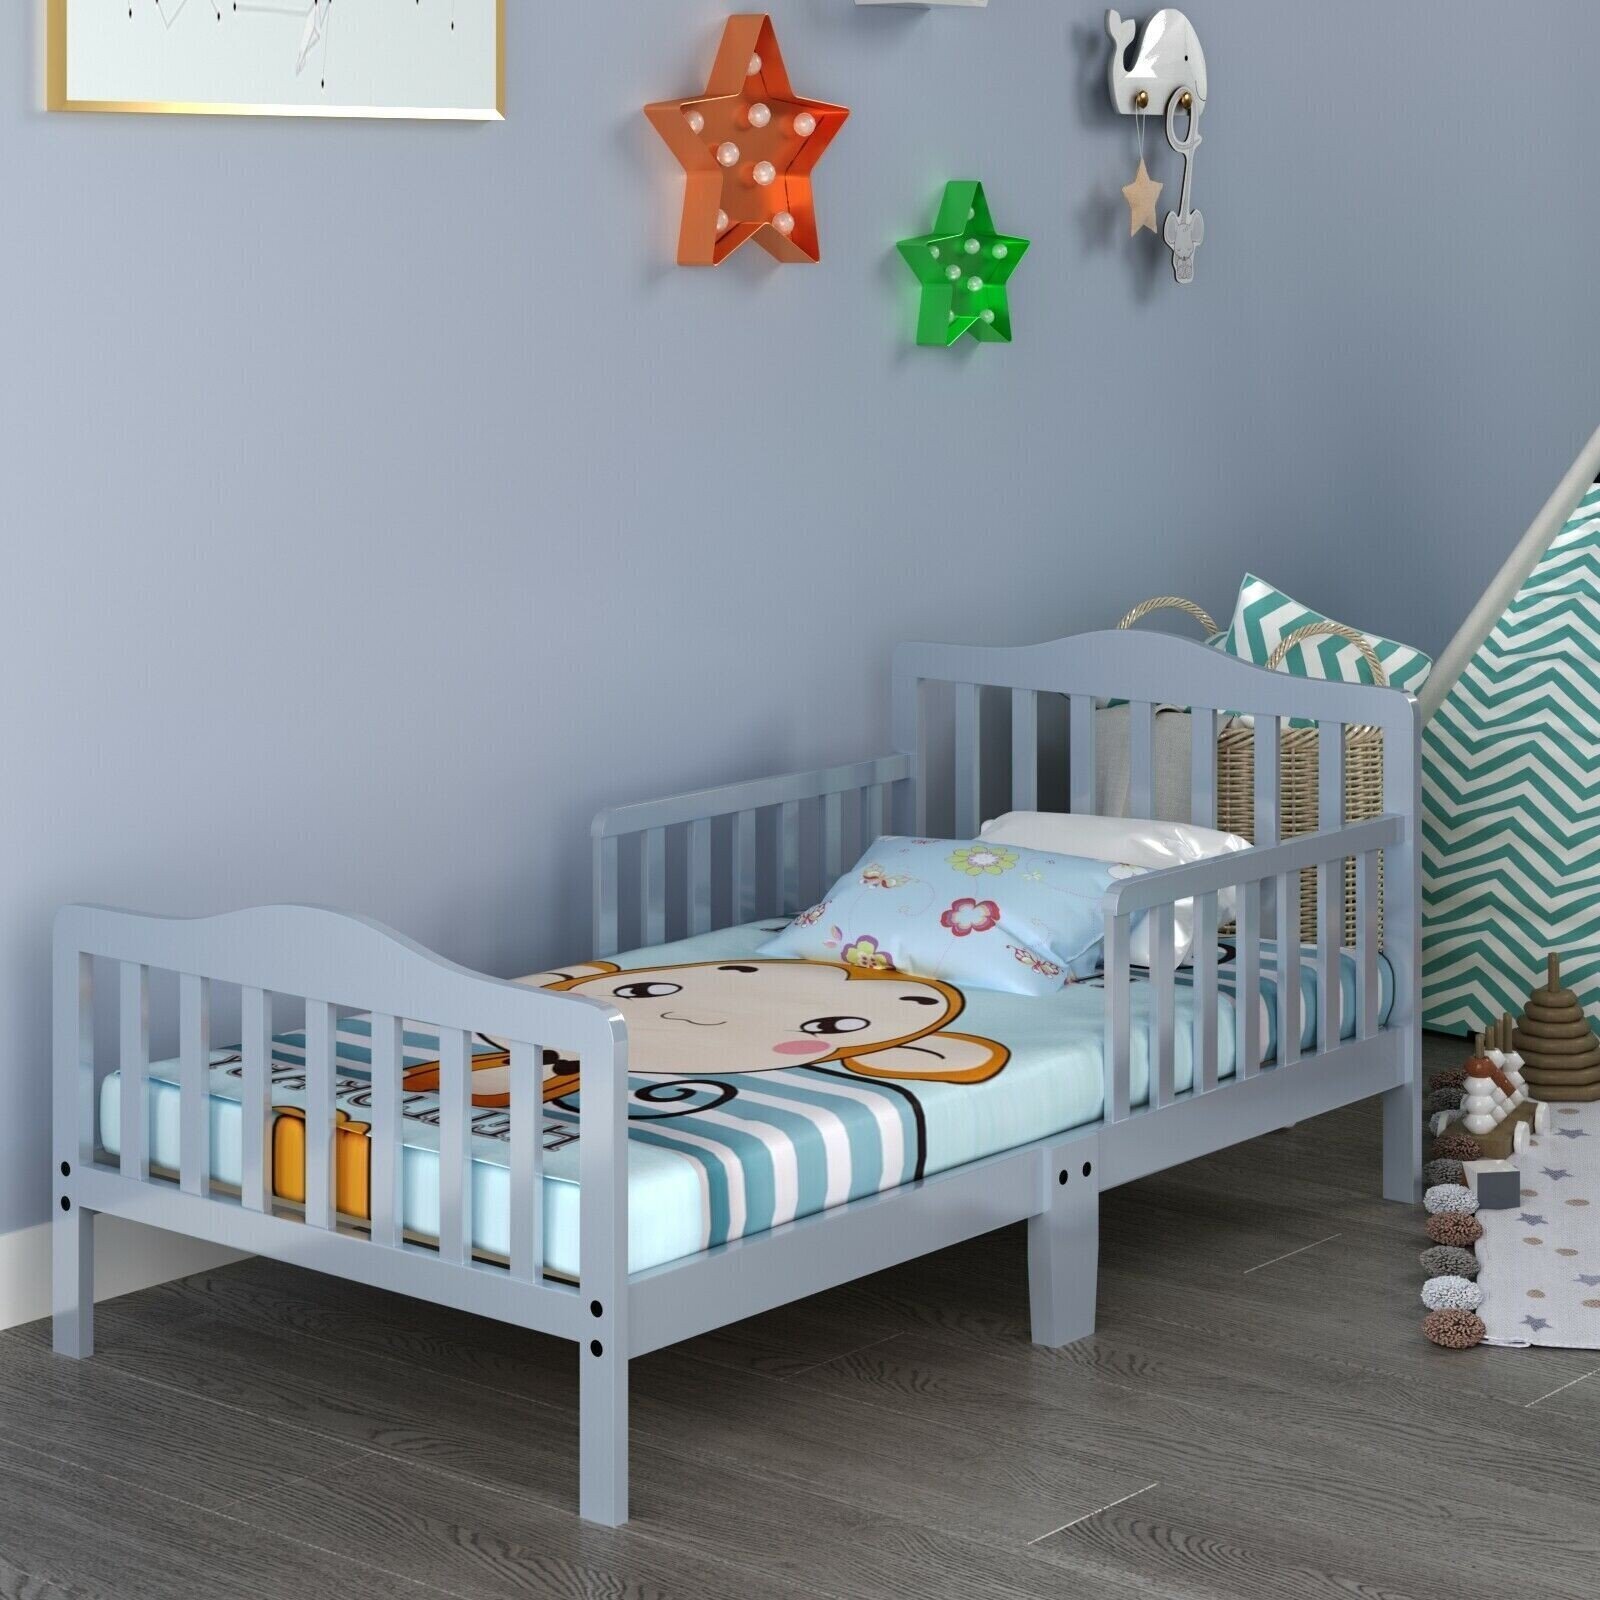 Classic Design Convertible Toddler Bed